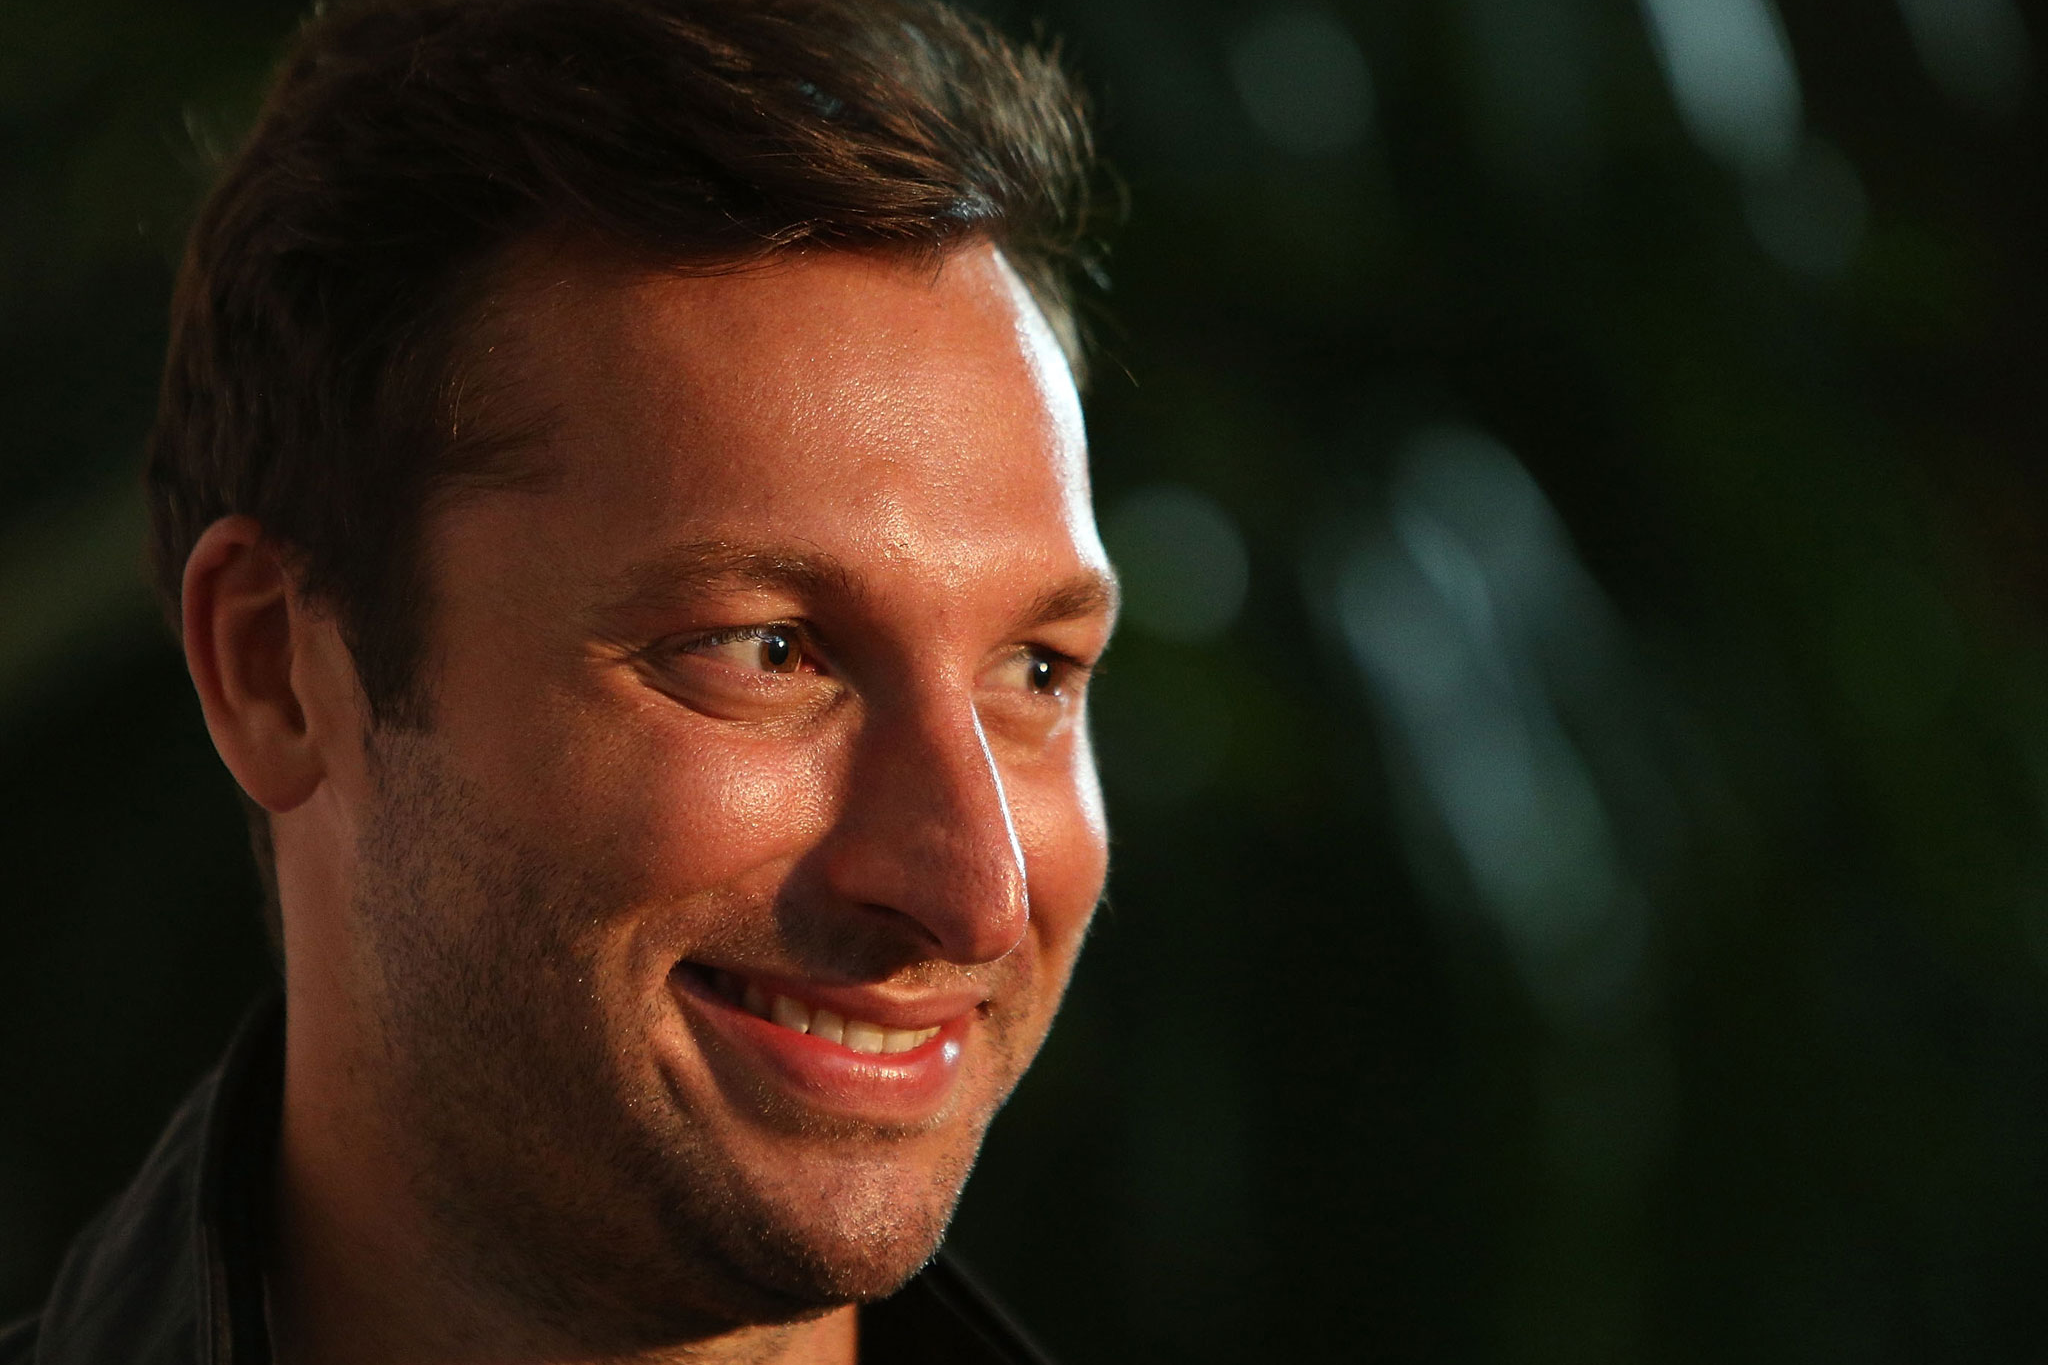 Ian Thorpe has reportedly been admitted to rehab after being found disorientated in a Sydney street